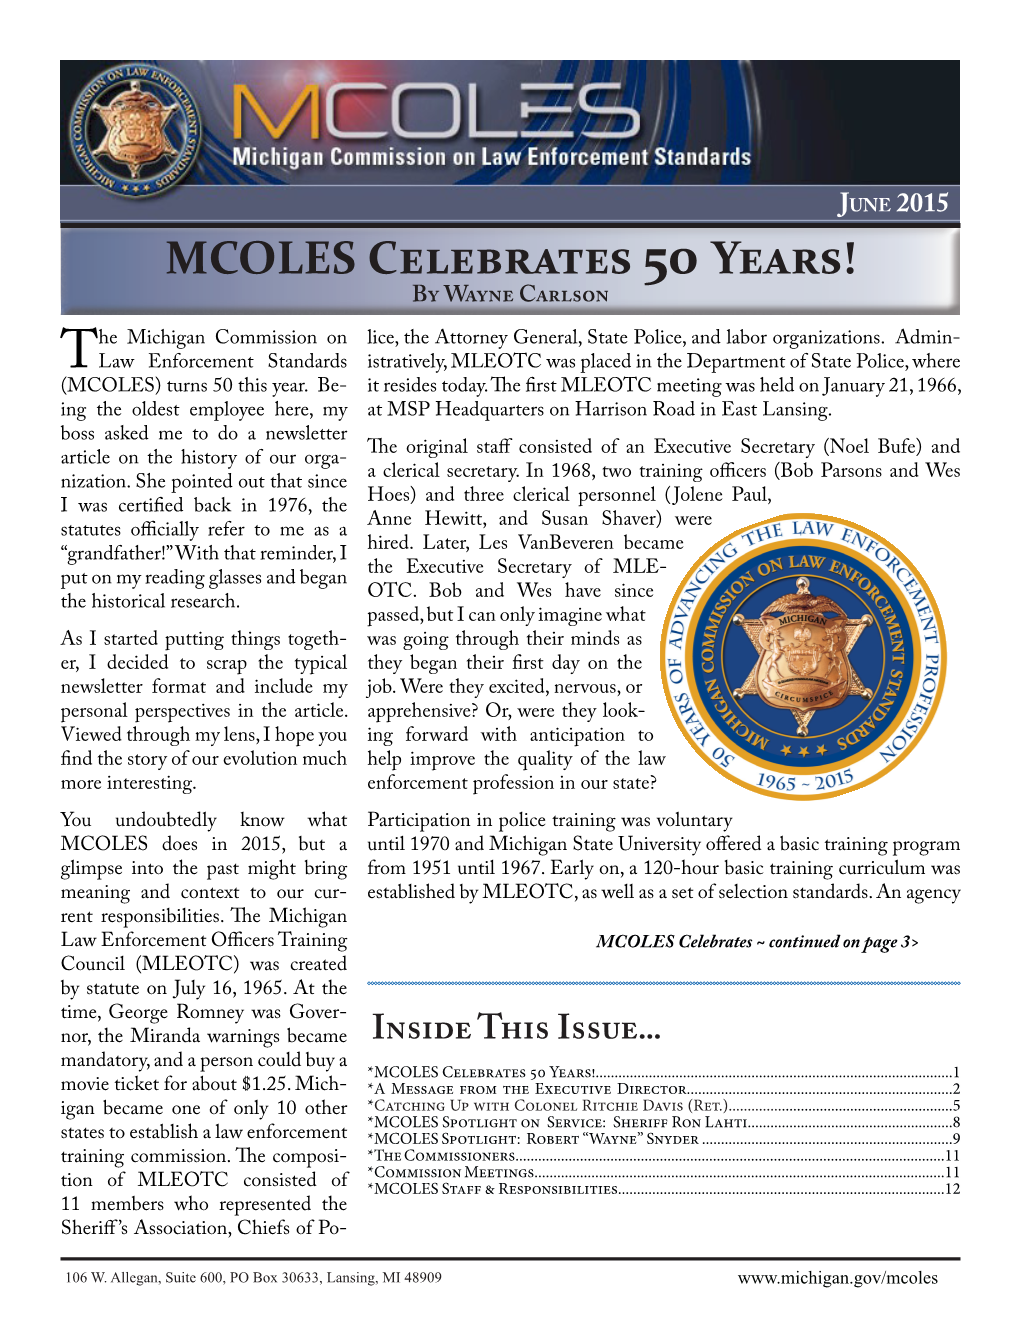 MCOLES Celebrates 50 Years! by Wayne Carlson He Michigan Commission on Lice, the Attorney General, State Police, and Labor Organizations